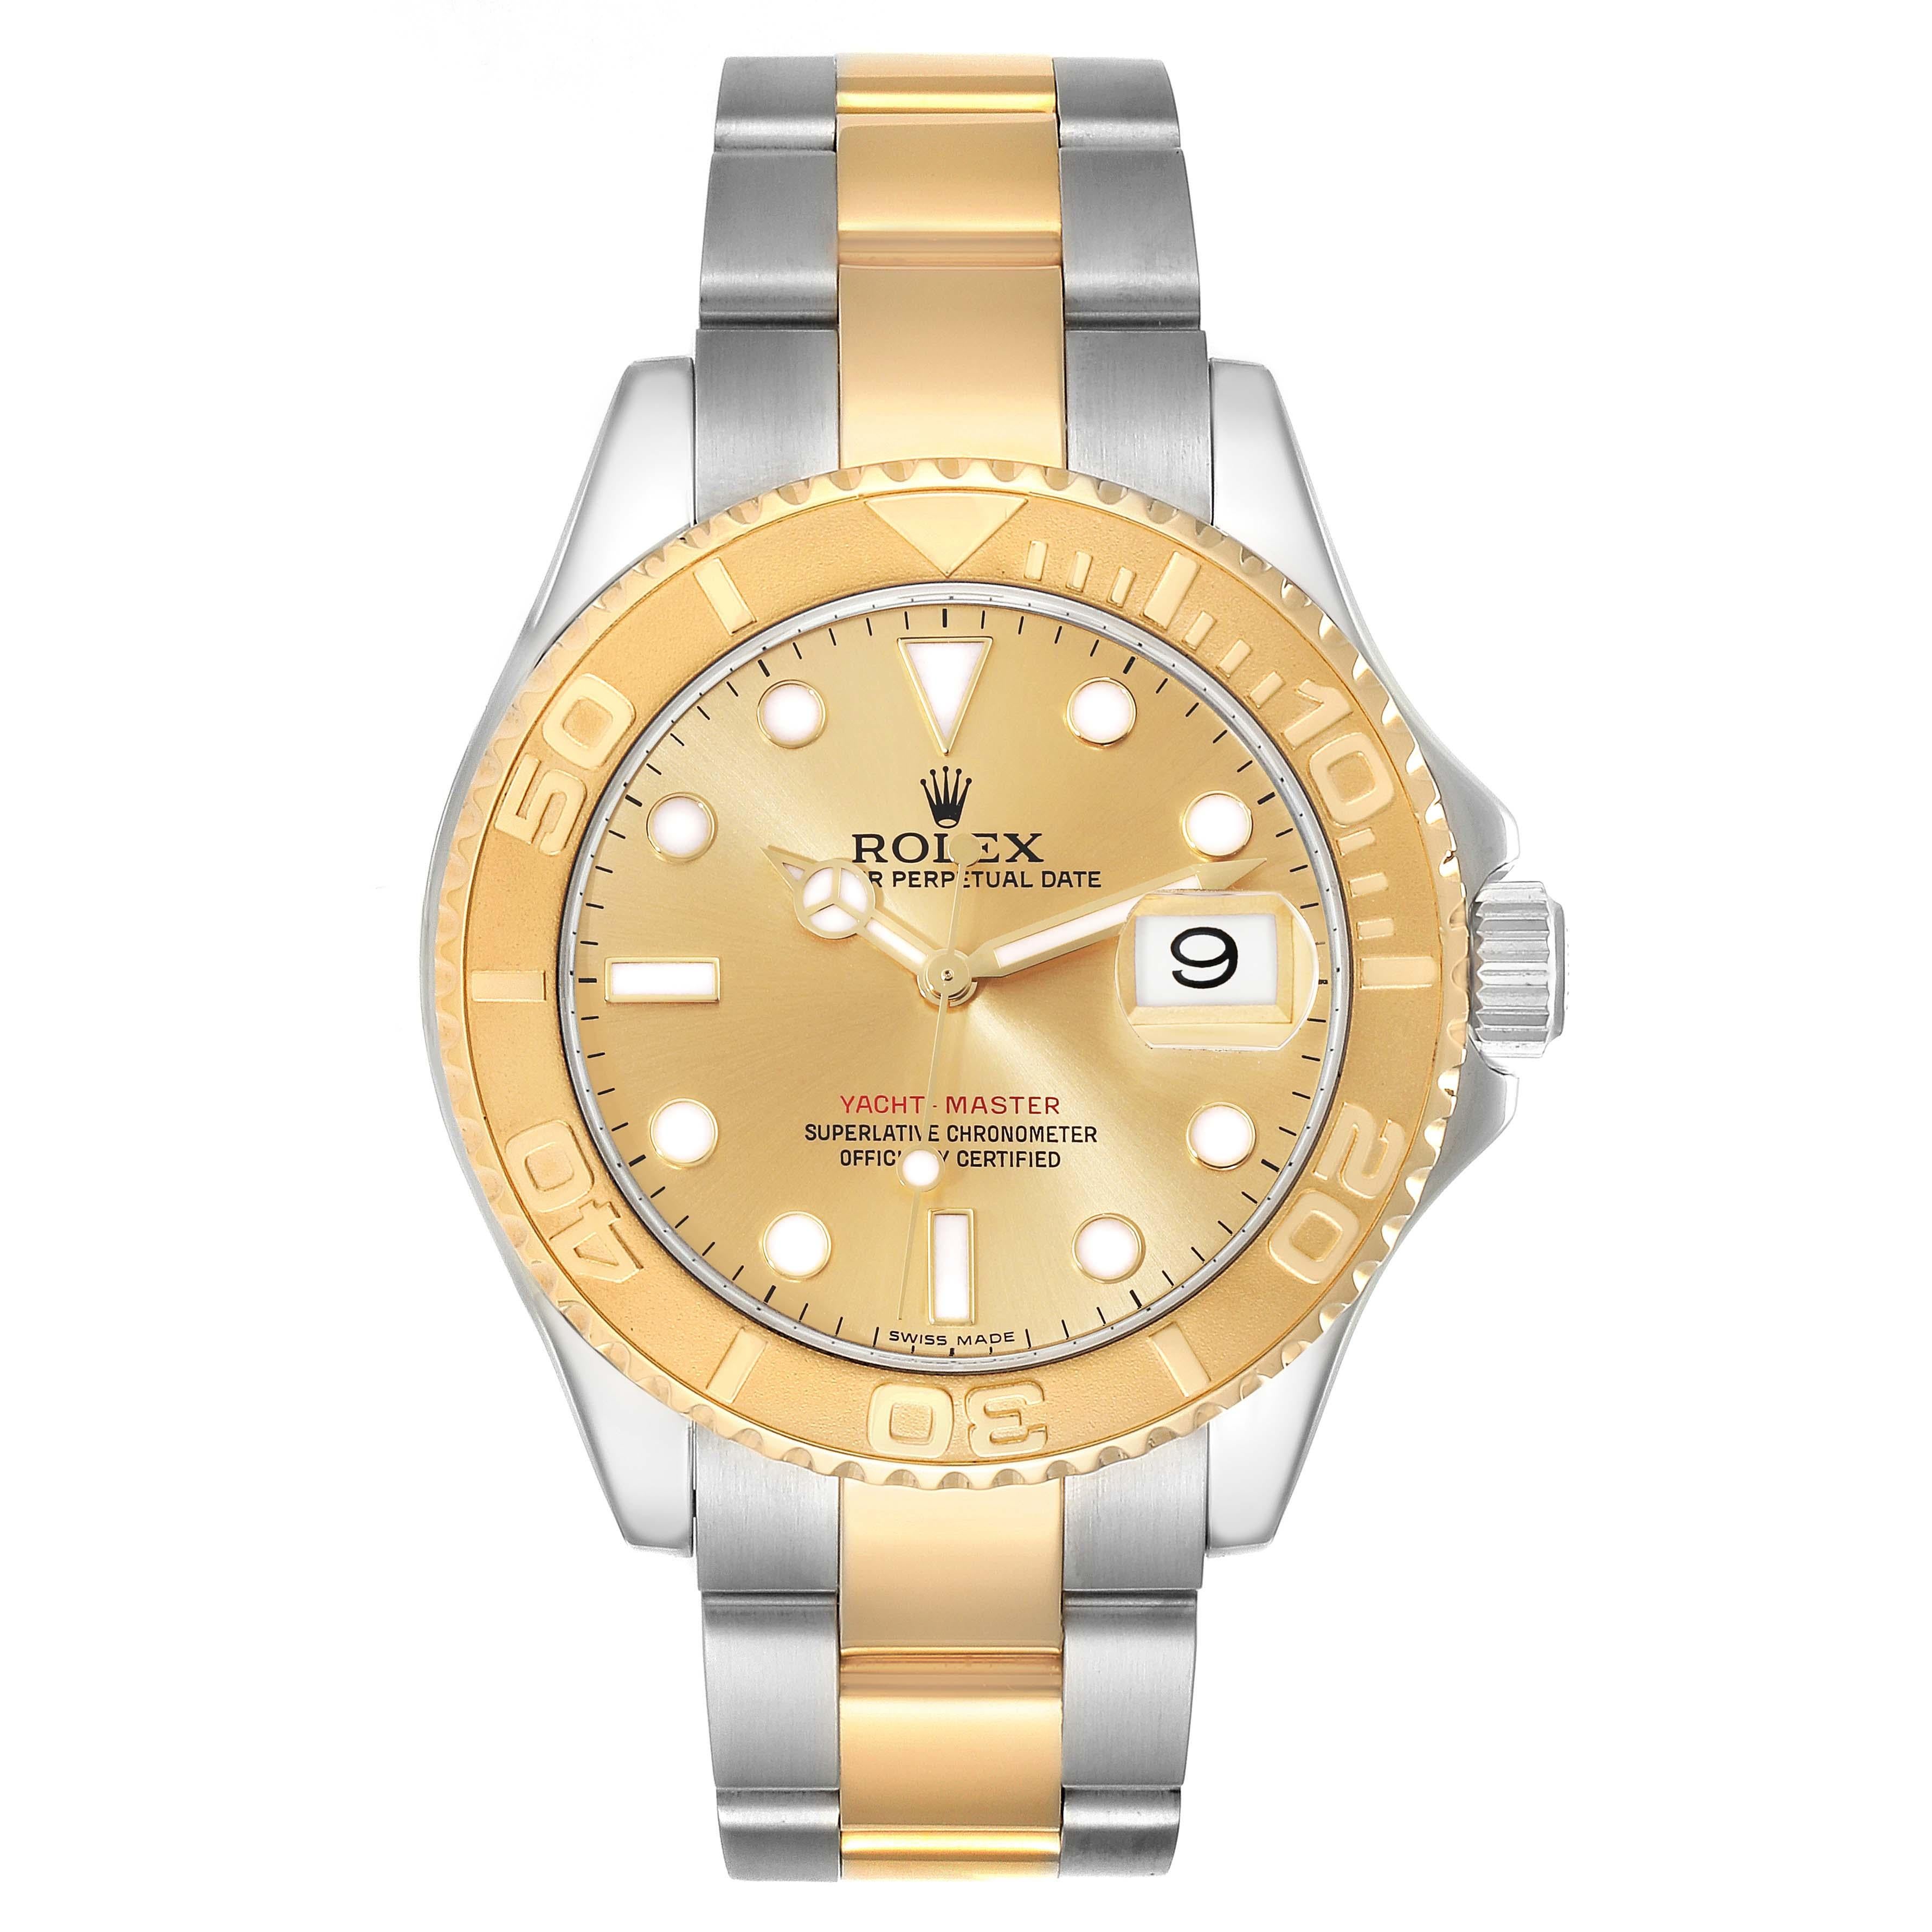 Rolex Yachtmaster Steel Yellow Gold Champagne Dial Mens Watch 16623. Officially certified chronometer self-winding movement. Stainless steel case 40 mm in diameter. Rolex logo on a crown. 18k yellow gold special time-lapse unidirectional rotating